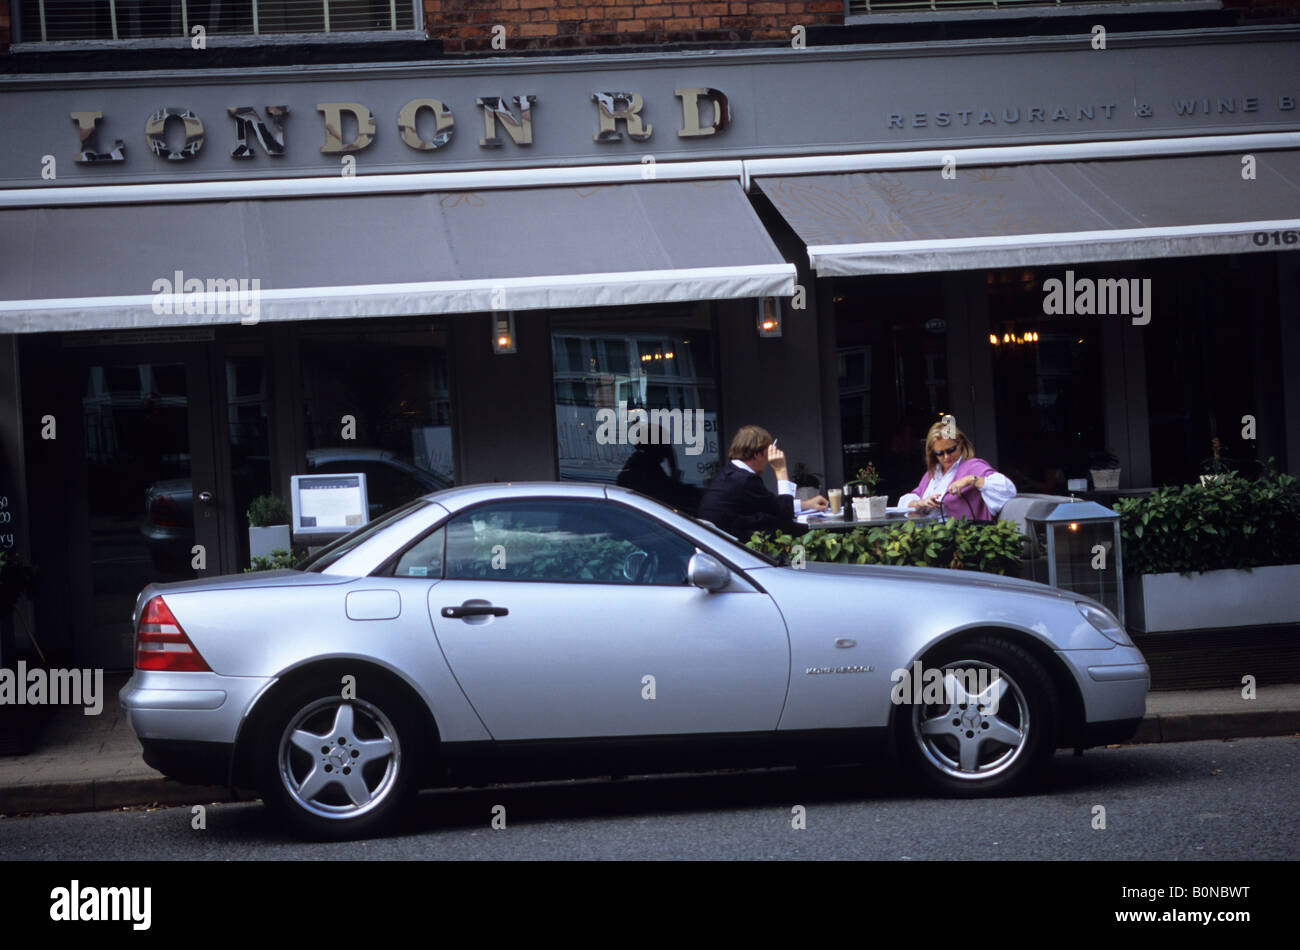 Smart Restaurant With Car Parked Outside In Alderley Edge Cheshire Stock Photo